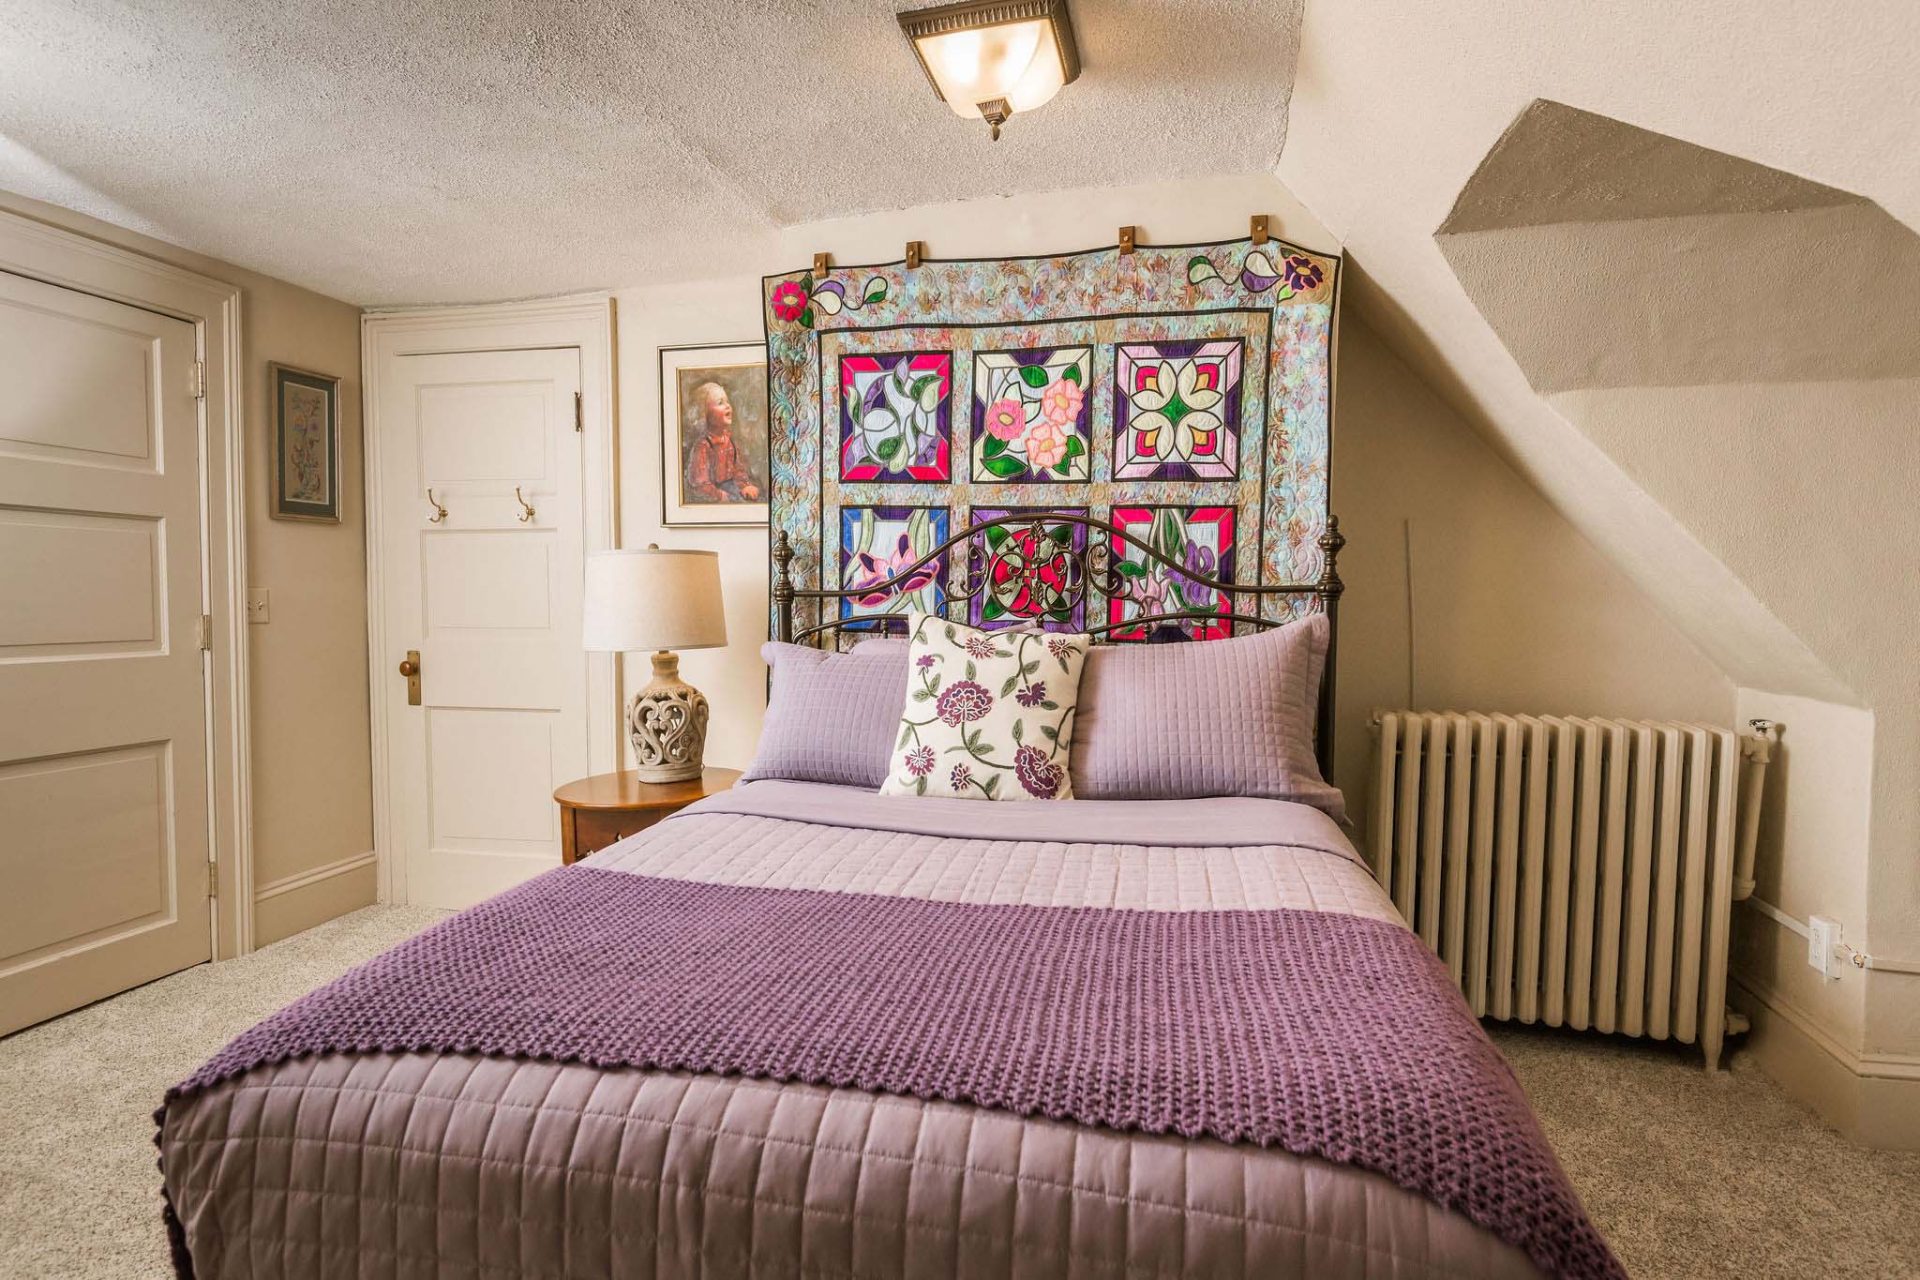 A bright, beige room with a queen bed with purple linen and a quilt hanging on the wall at the head of the bed.